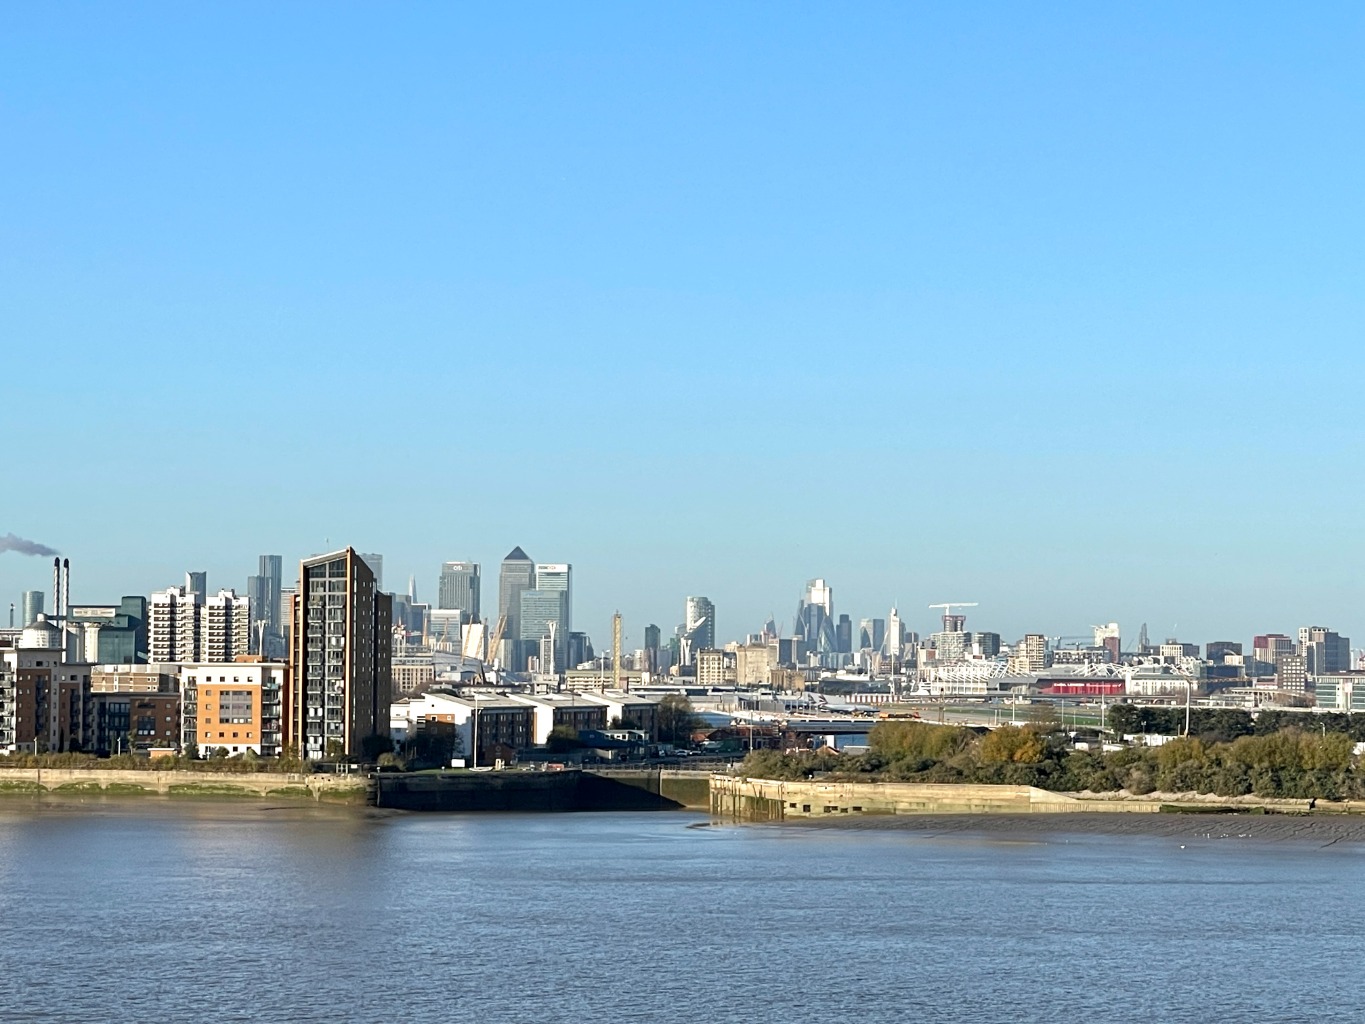 Beaumont Gibbs are offering this stunning penthouse flat for rent on an unfurnished basis. Situated on the river front in West Thamesmead and right next to the Thames path, which leads you into Woolwich & Greenwich.